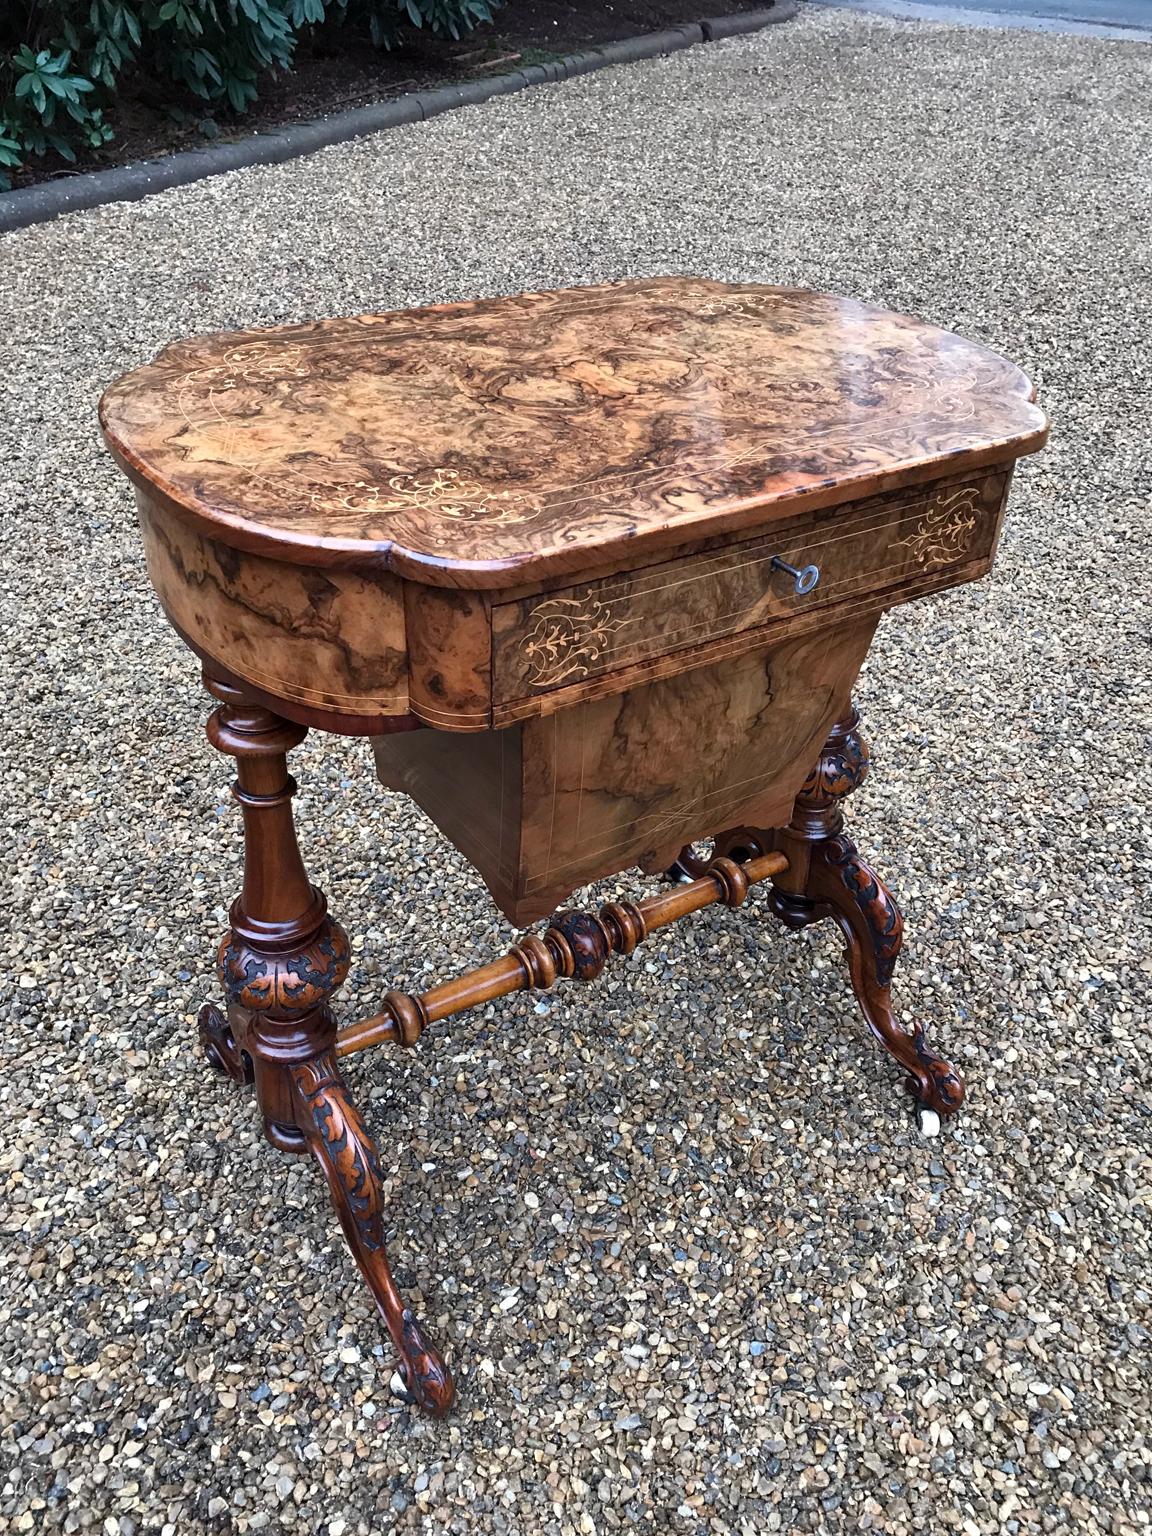 High quality 19th century burr walnut and marquetry work table with a central drawer with fitted compartments, a pull out box section below, turned / carved legs and stretchers,
circa 1860
Dimensions:
Width 26 inches – 66 cms
Depth 17 inches –